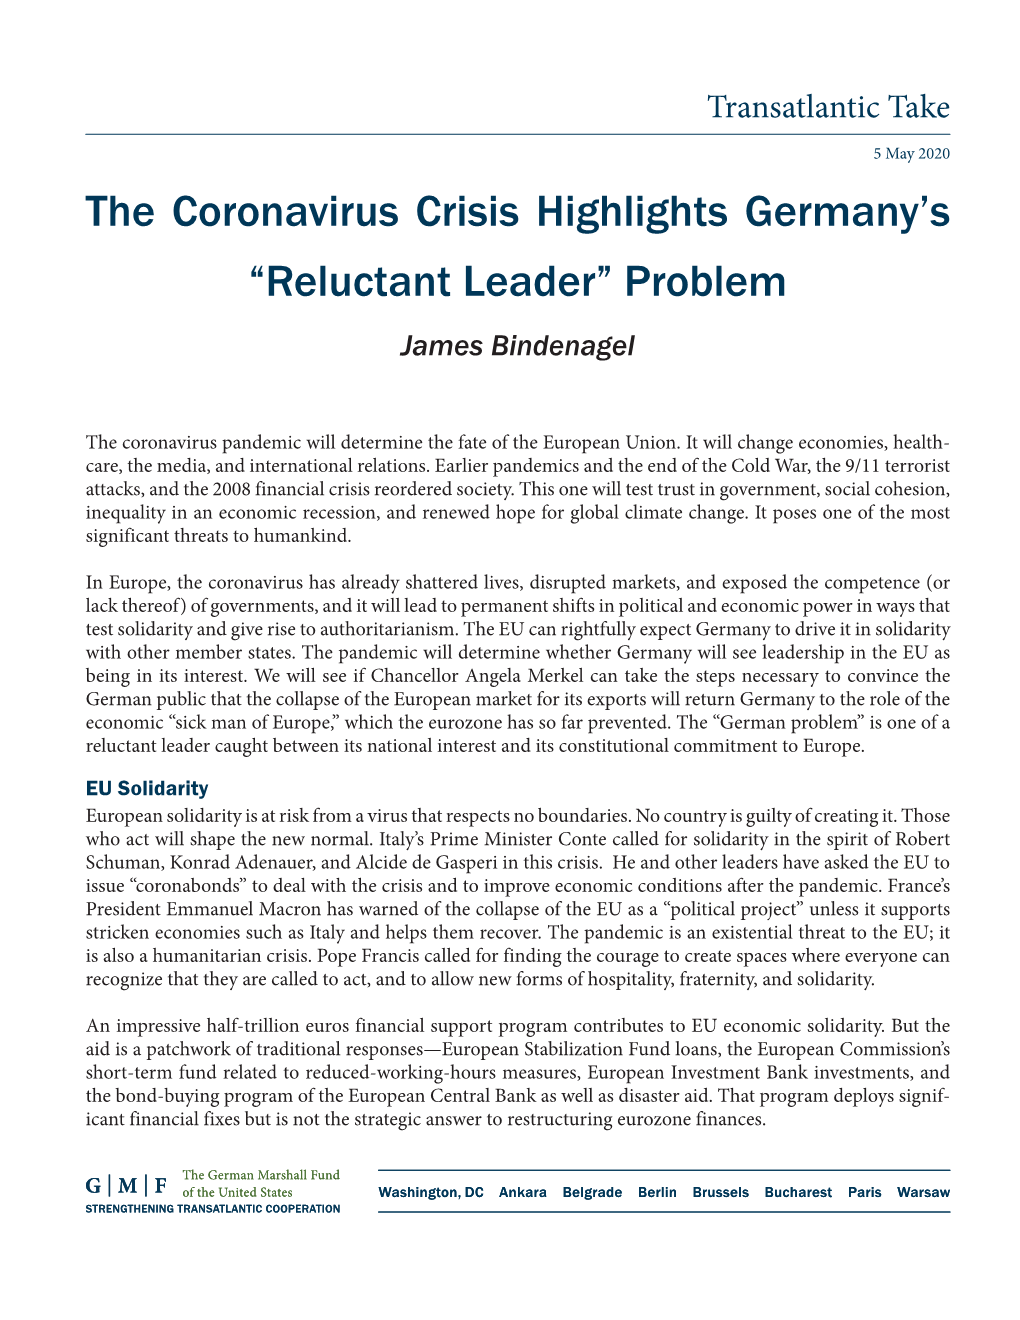 The Coronavirus Crisis Highlights Germany's “Reluctant Leader”